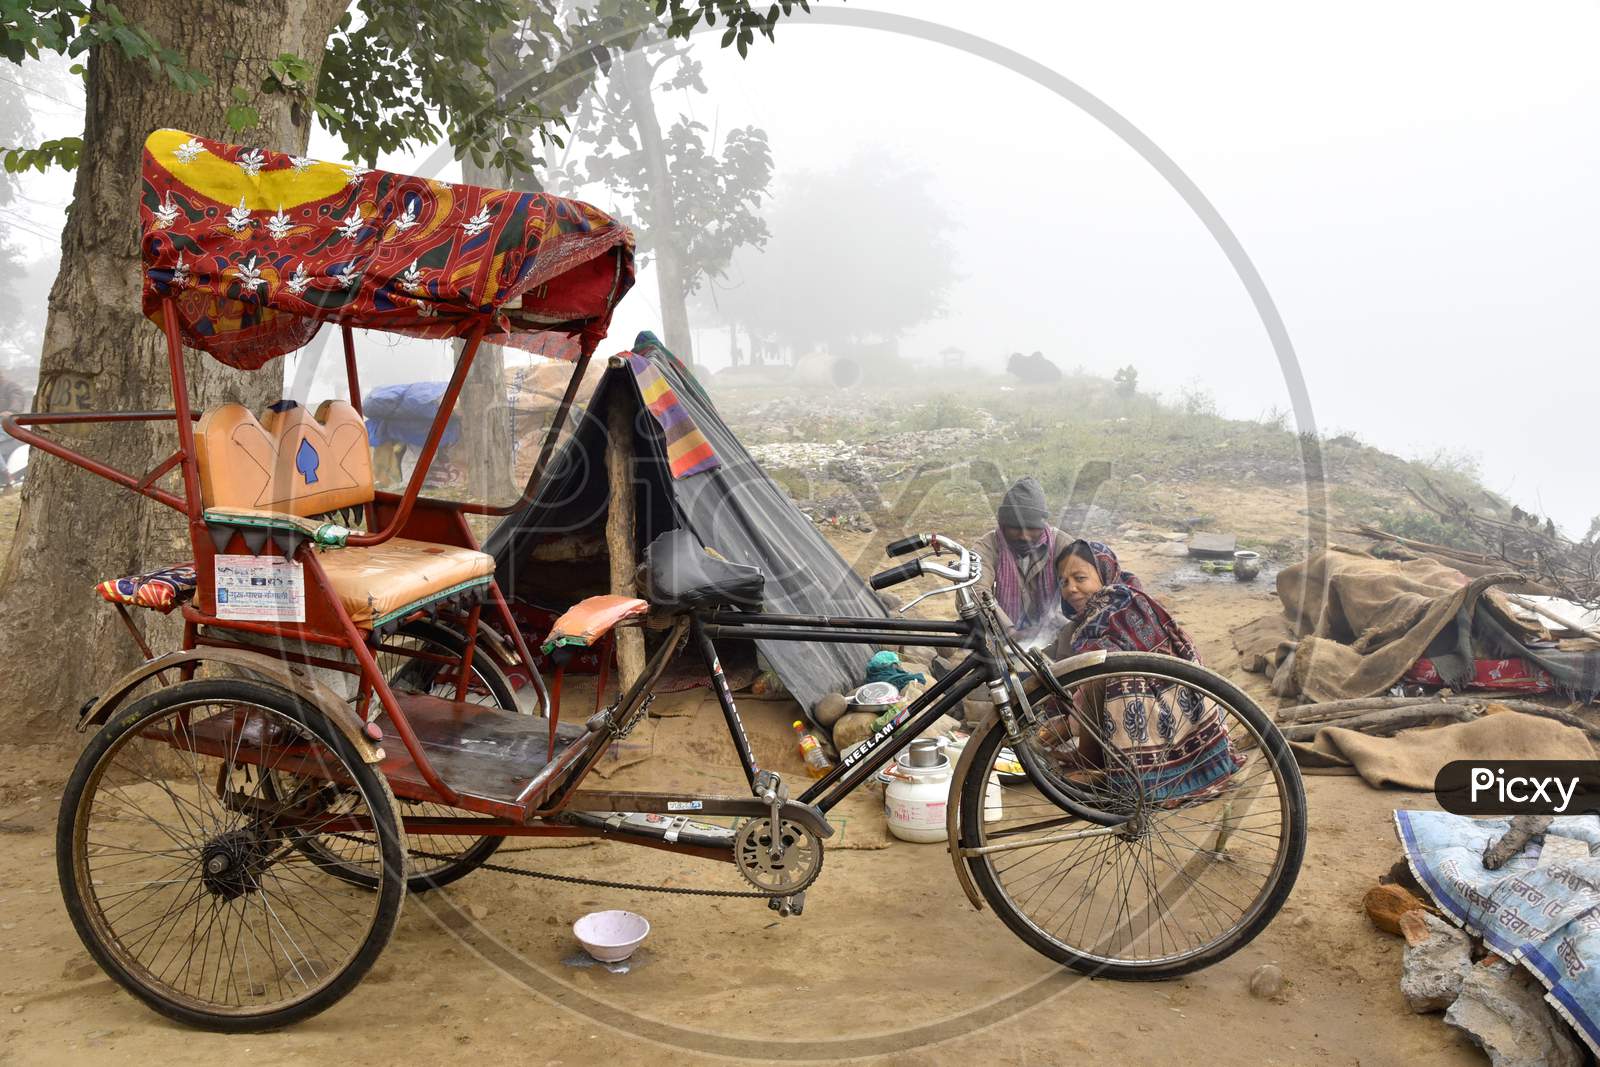 Indian Poor Families Living In Tents on Road Sides